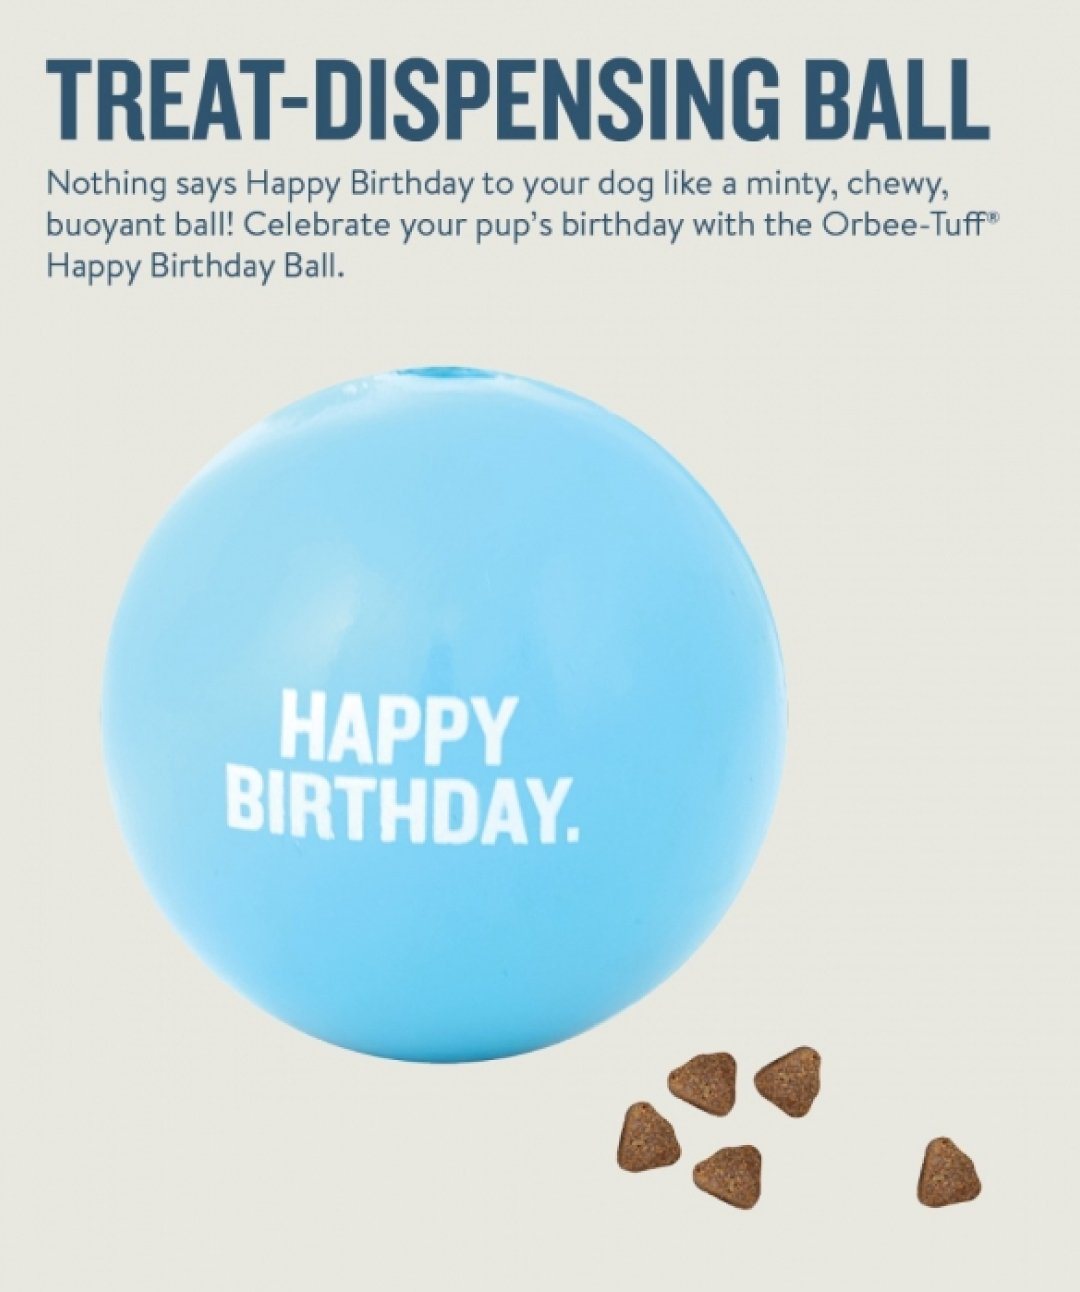 Orbee-Tuff ‘Happy Birthday’ Treat Dispensing Dog Toy by Outward Hound Toys Rover 